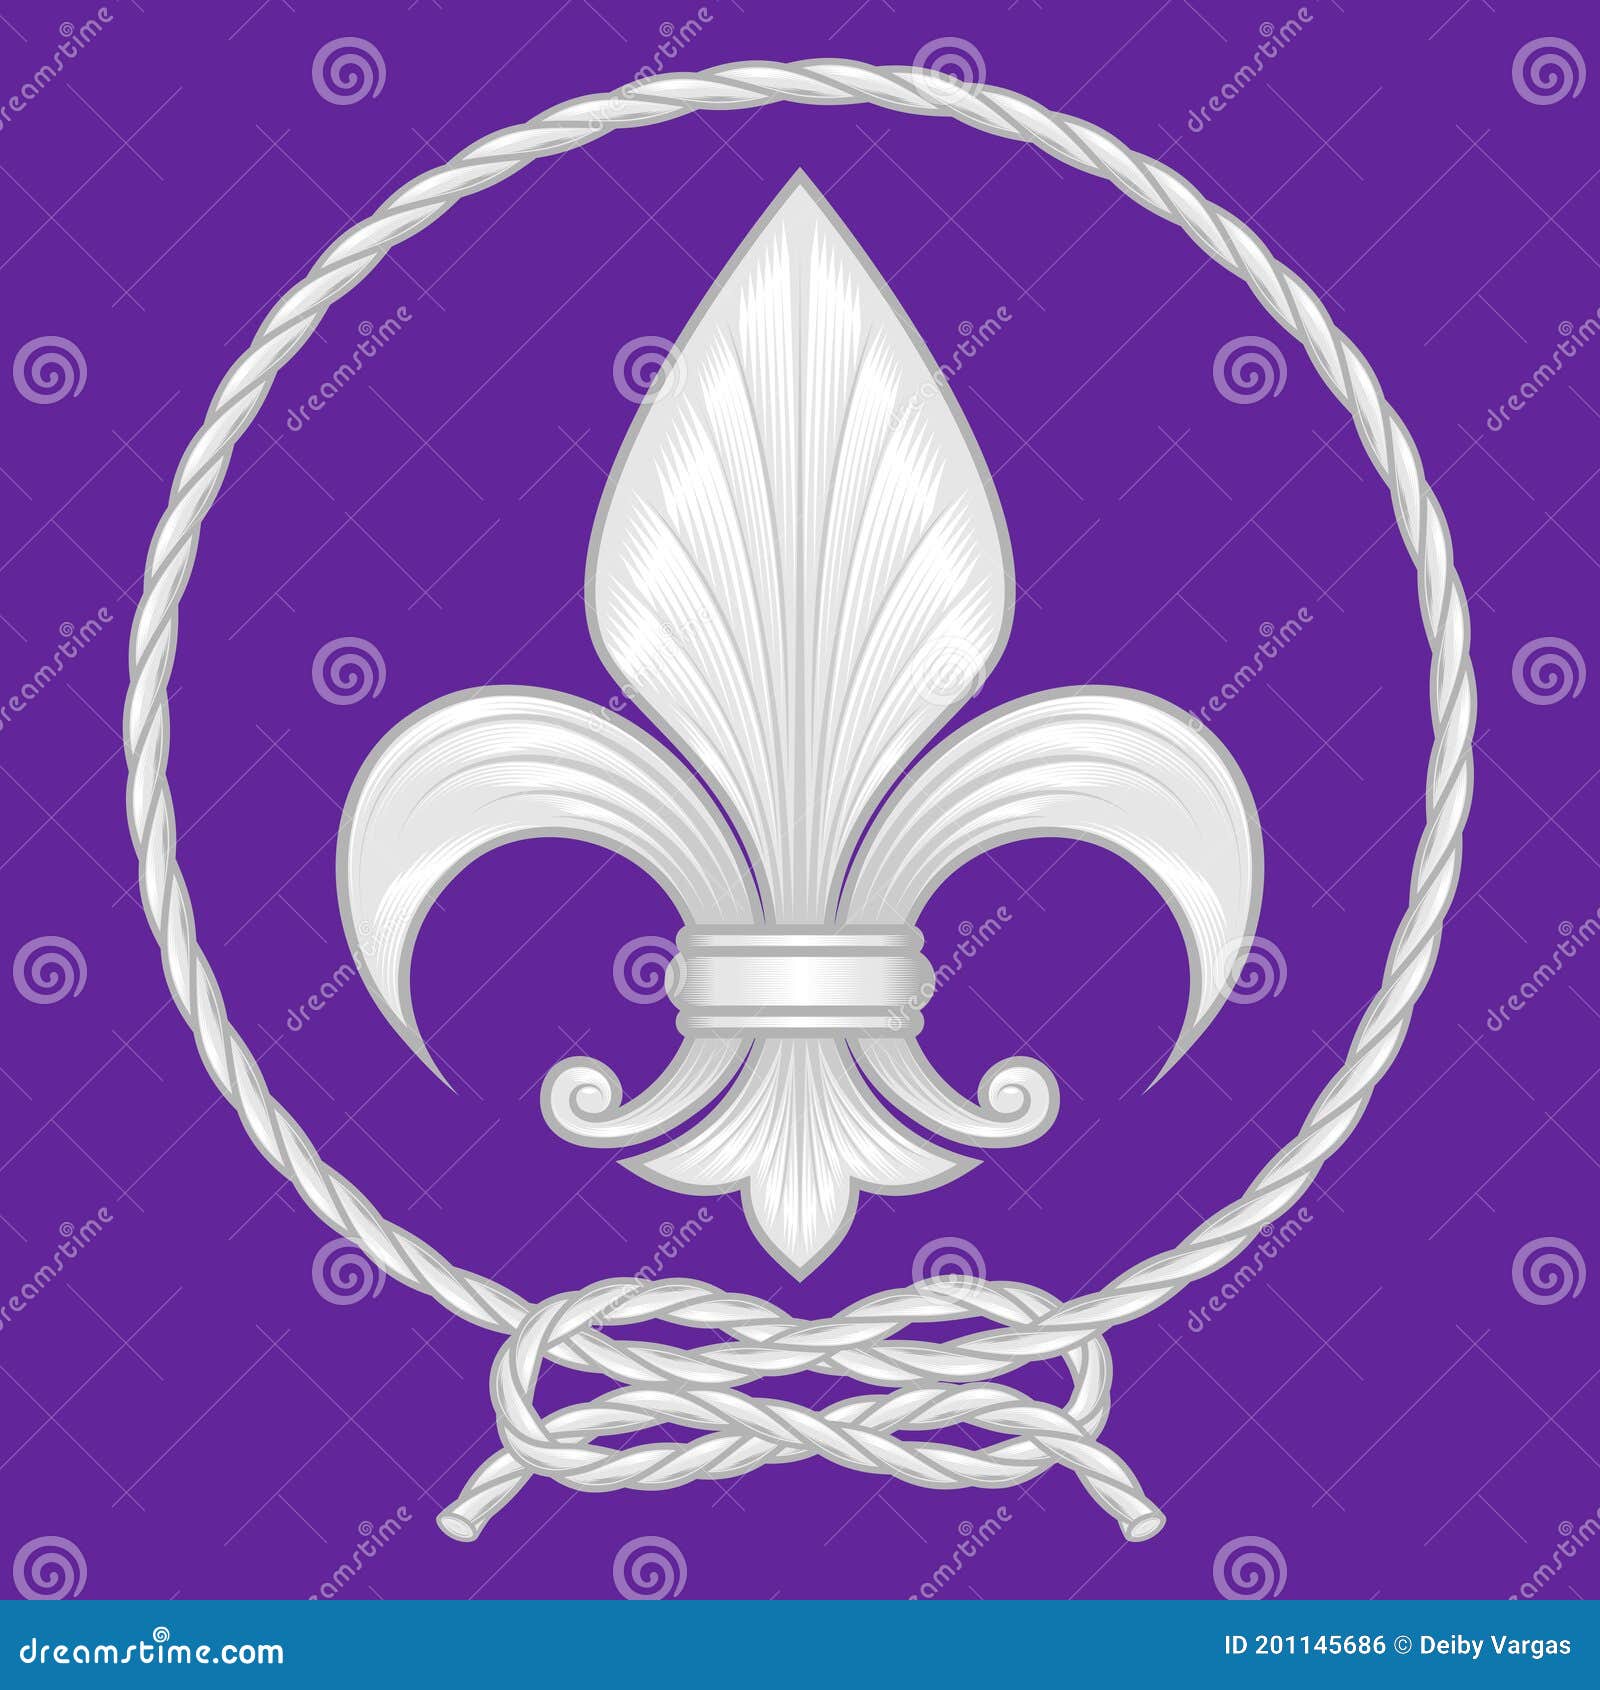   of a fleur de lis surrounded by an intertwined rope